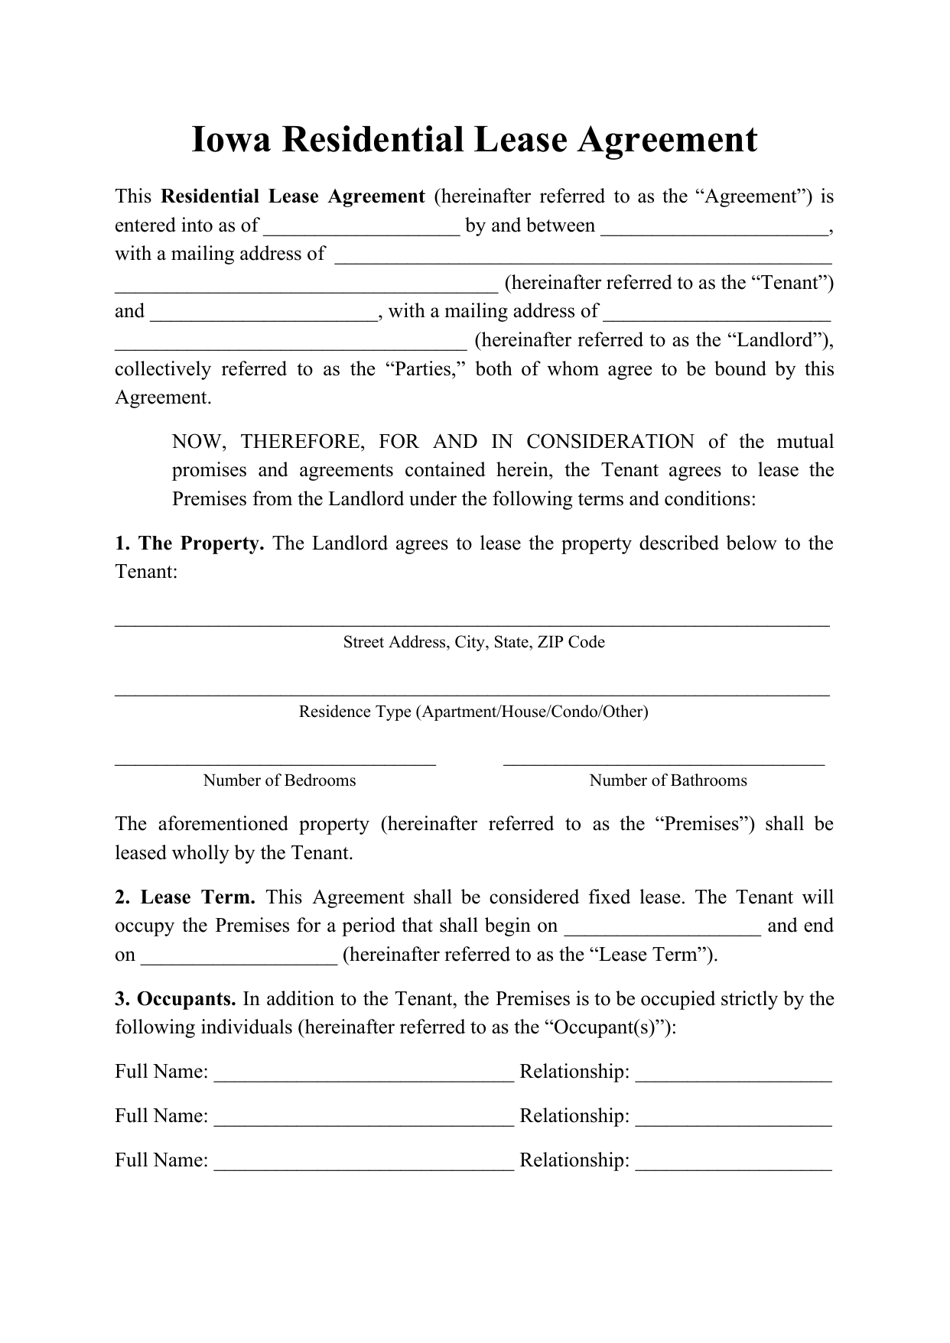 Residential Lease Agreement Template - Iowa, Page 1